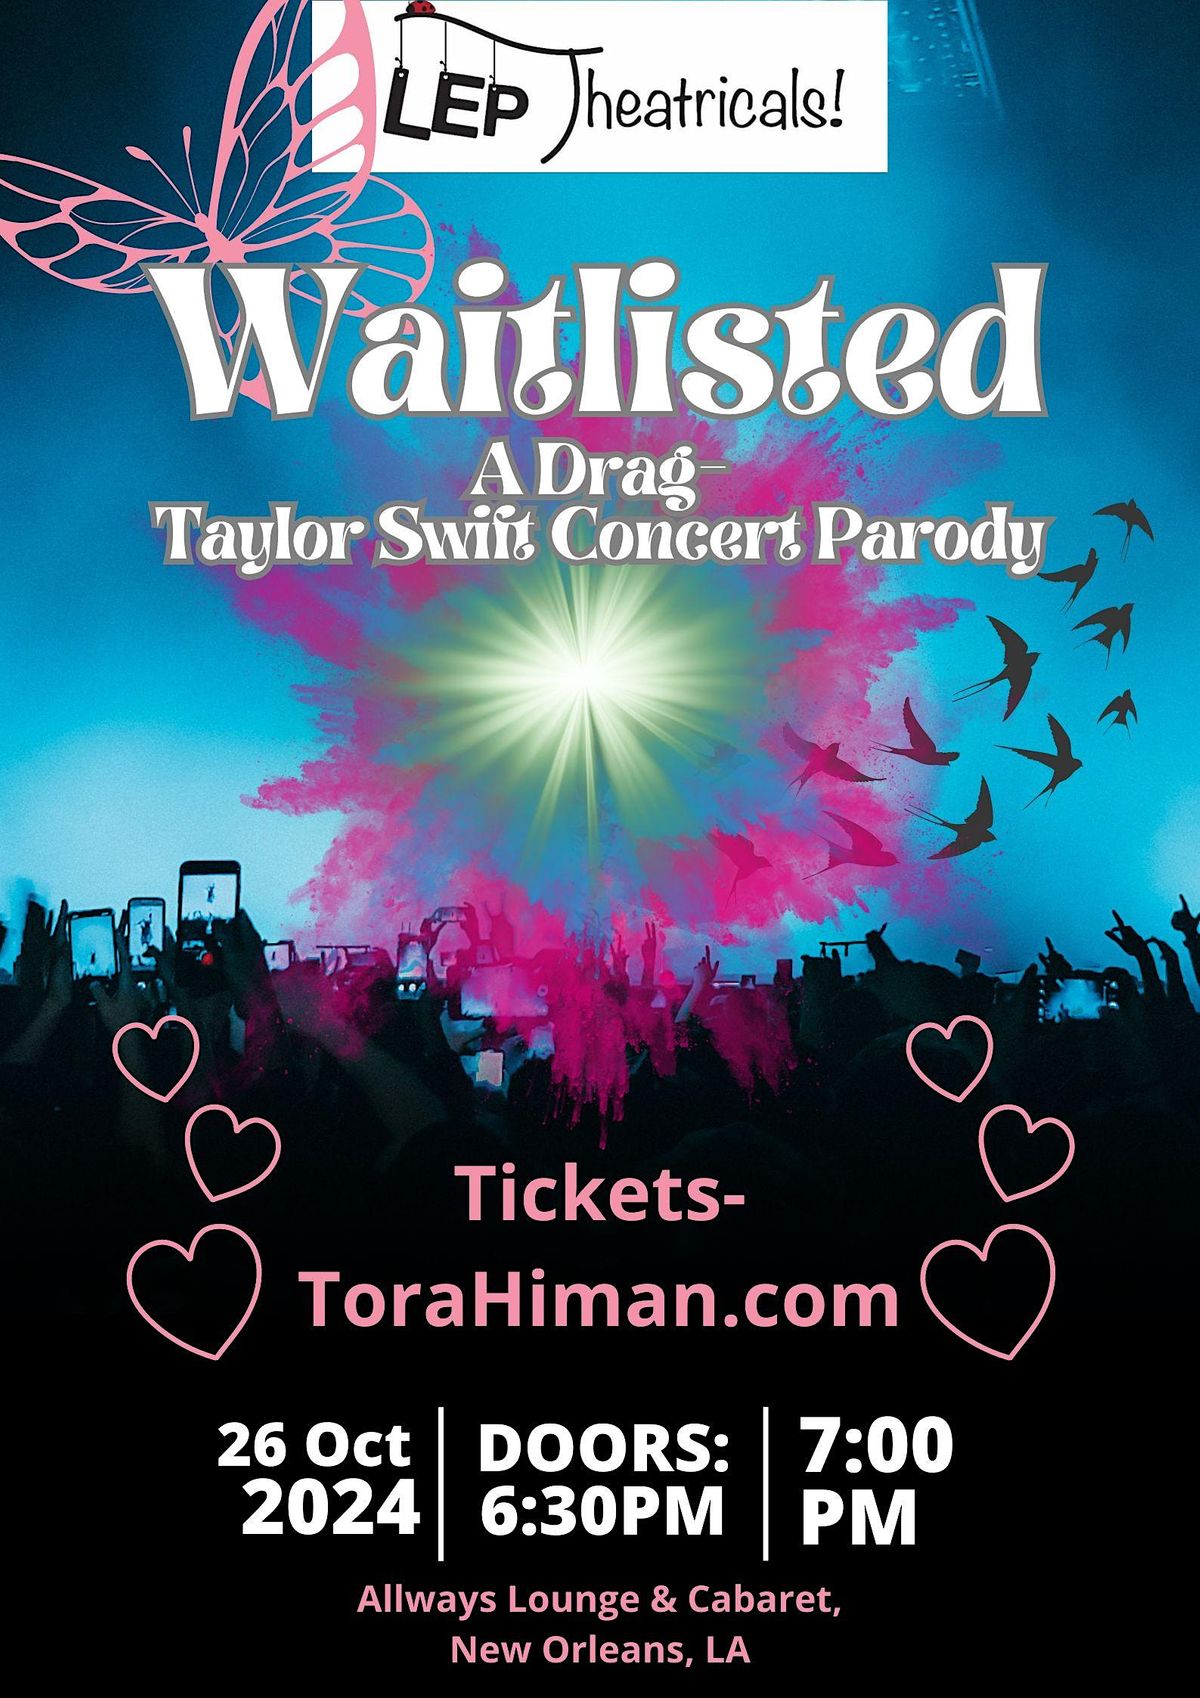 Waitlisted! A Drag, Taylor Swift Concert Parody